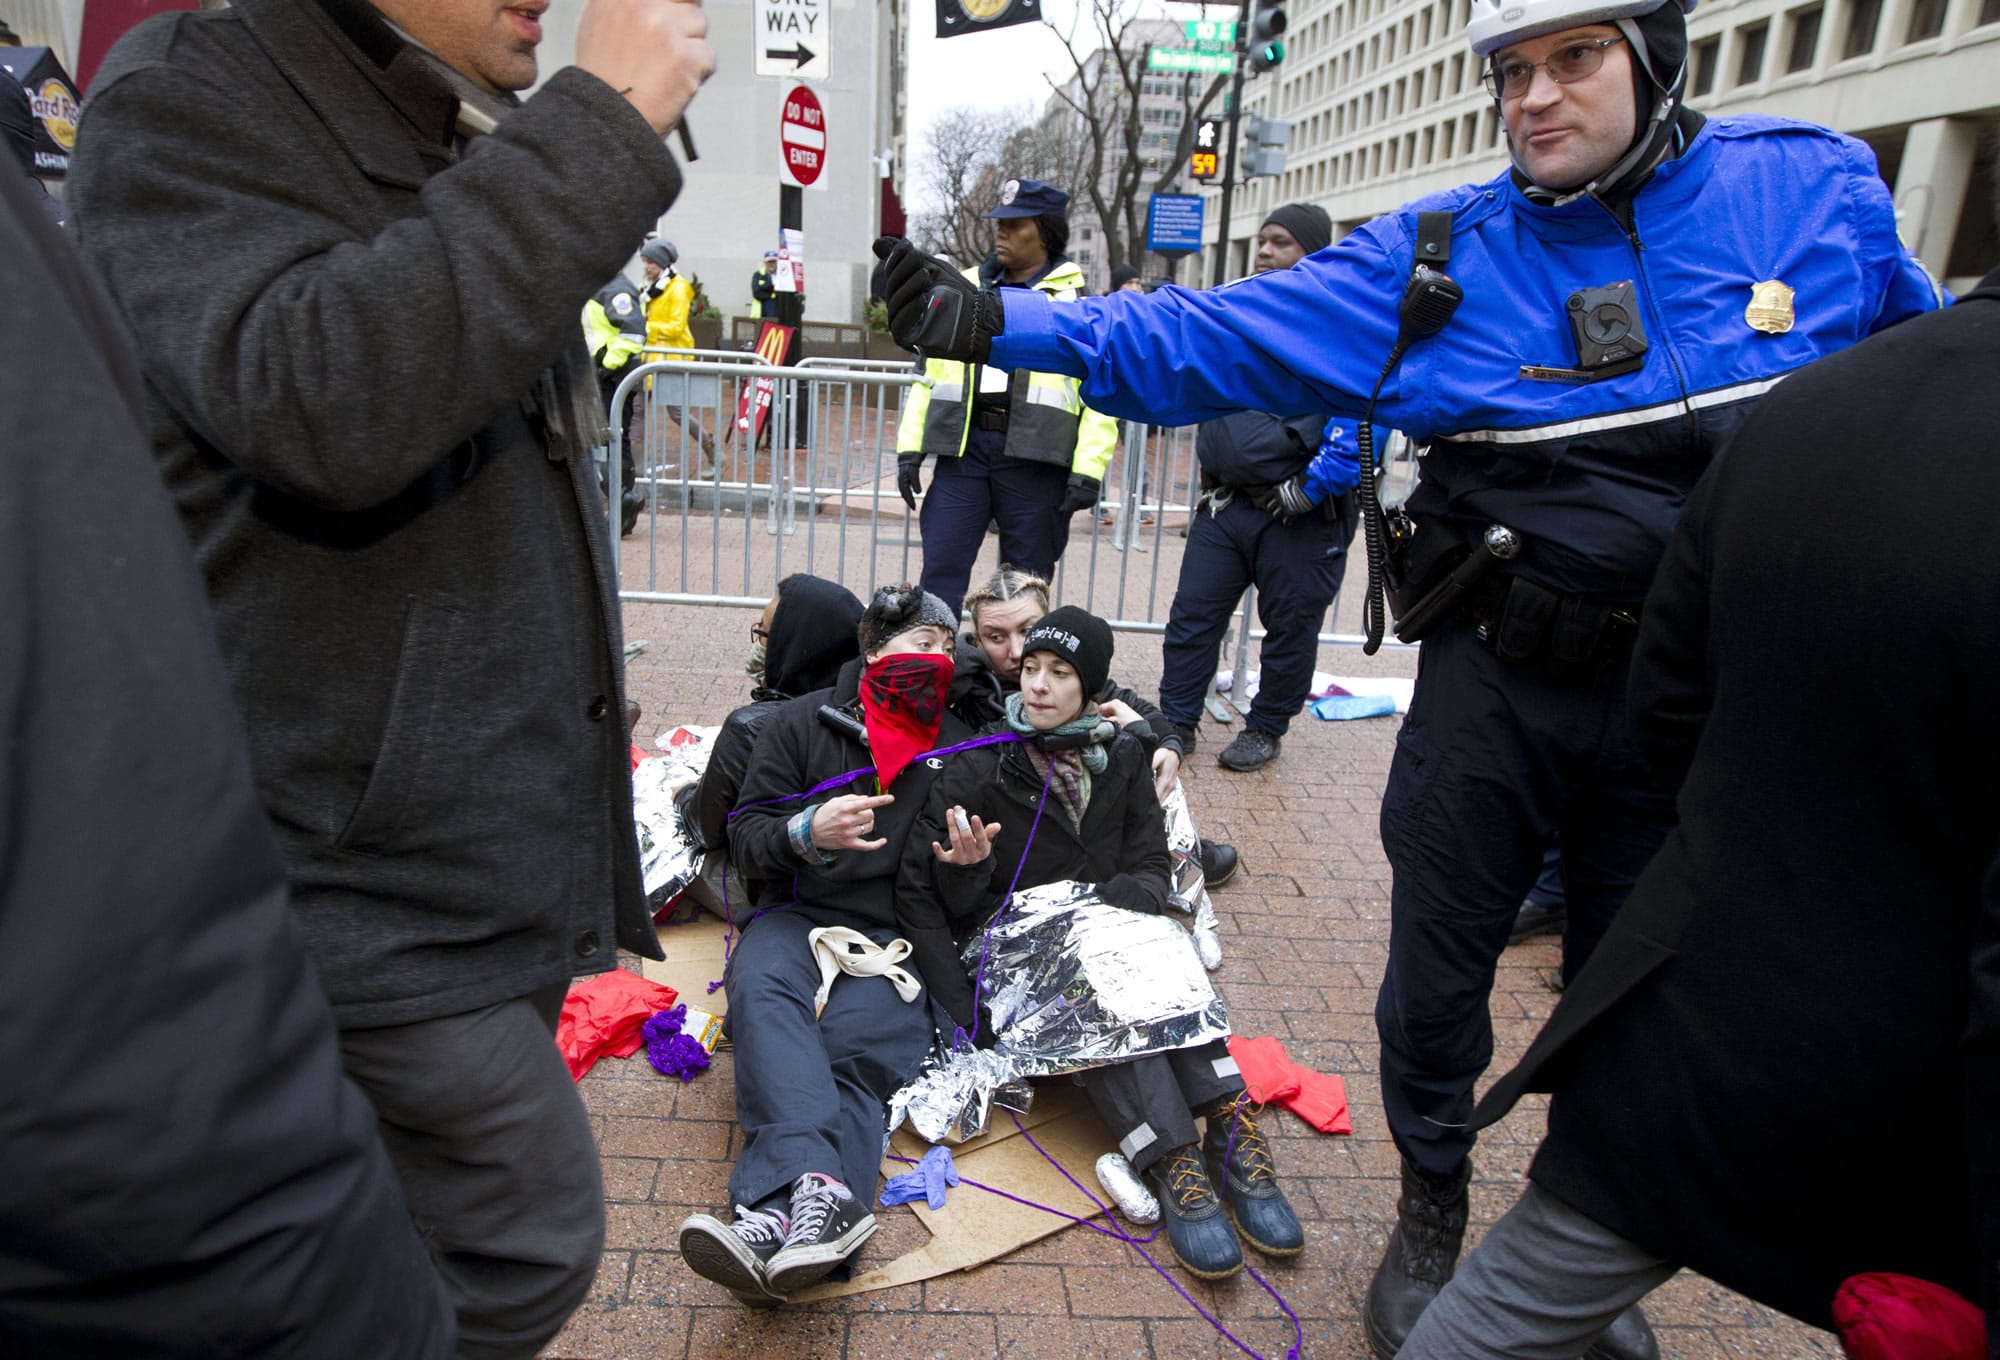 Demonstrators sit at one of the entrance as police officer let people pass let to the inauguration in Washington, Friday, Jan. 20, 2017, ahead of the President-elect Donald Trump inauguration.